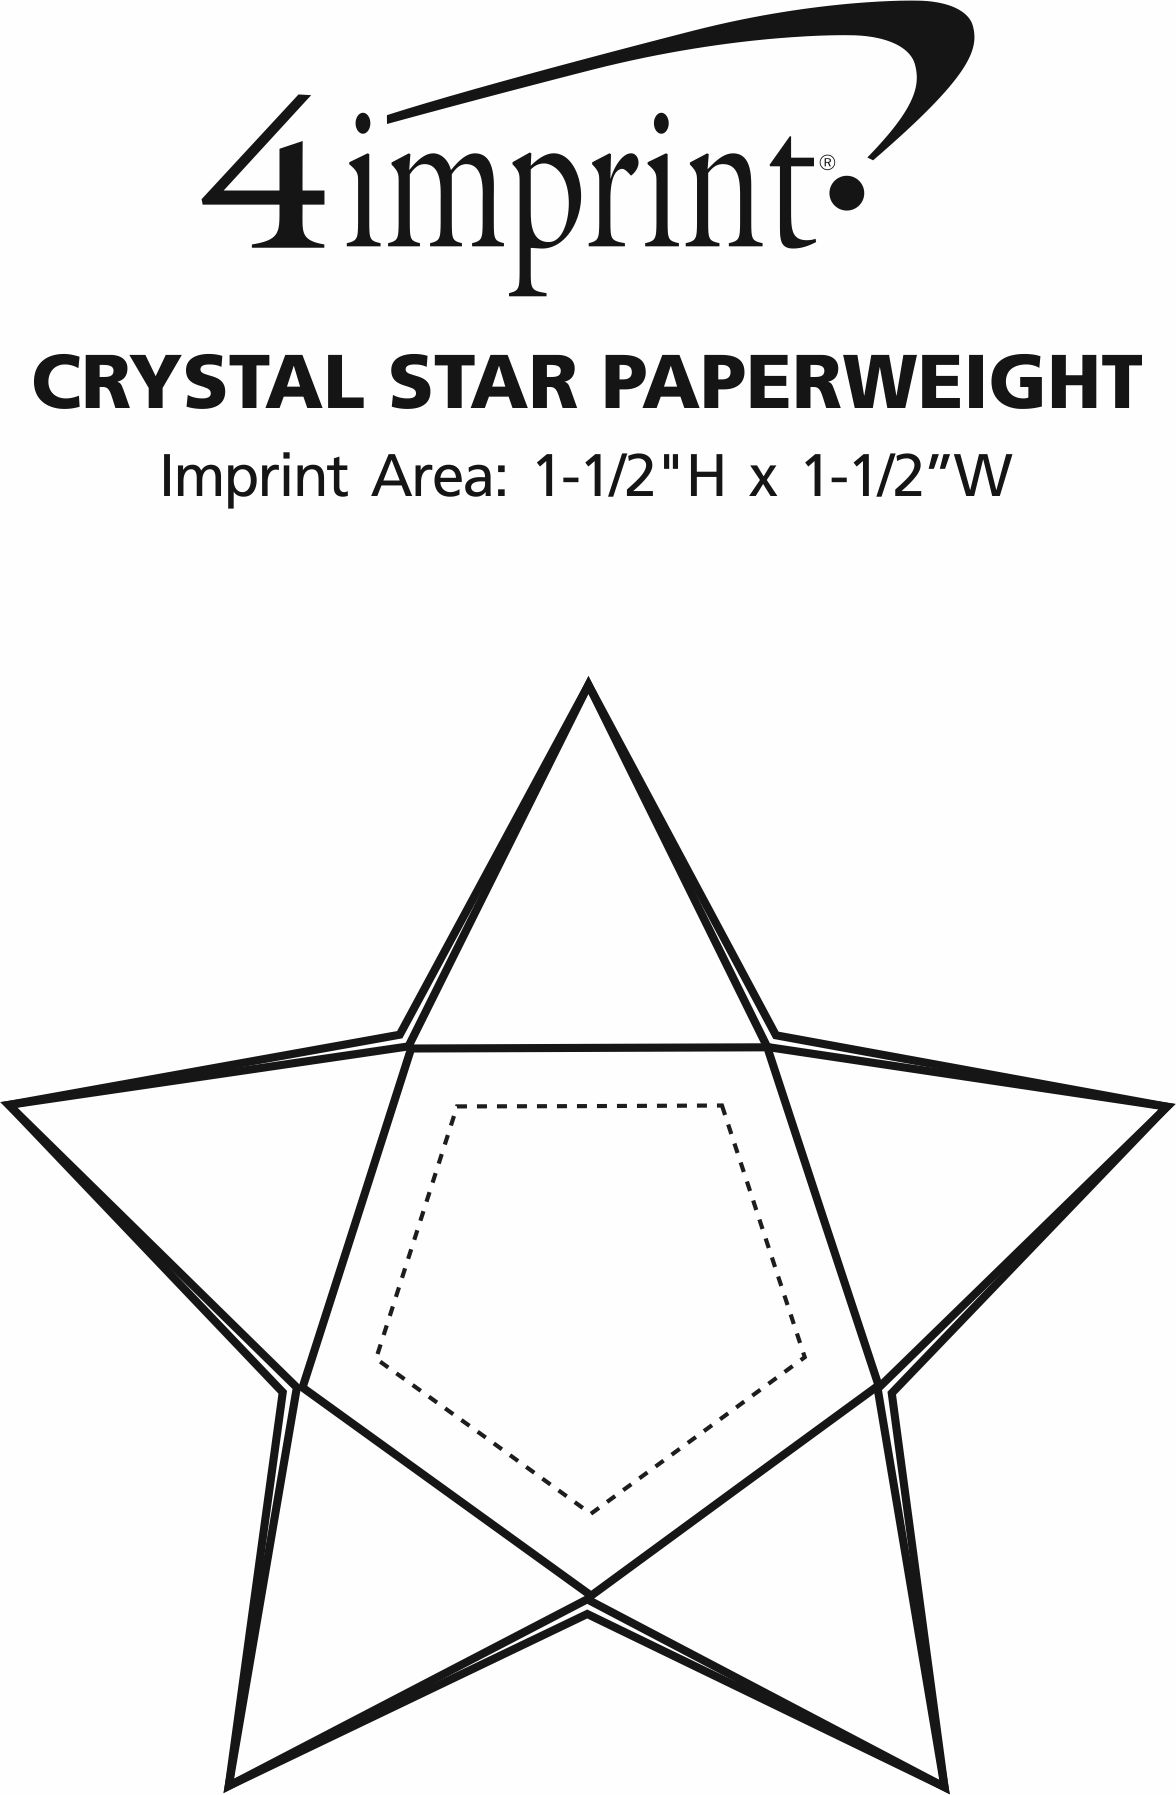 Imprint Area of Crystal Star Paperweight